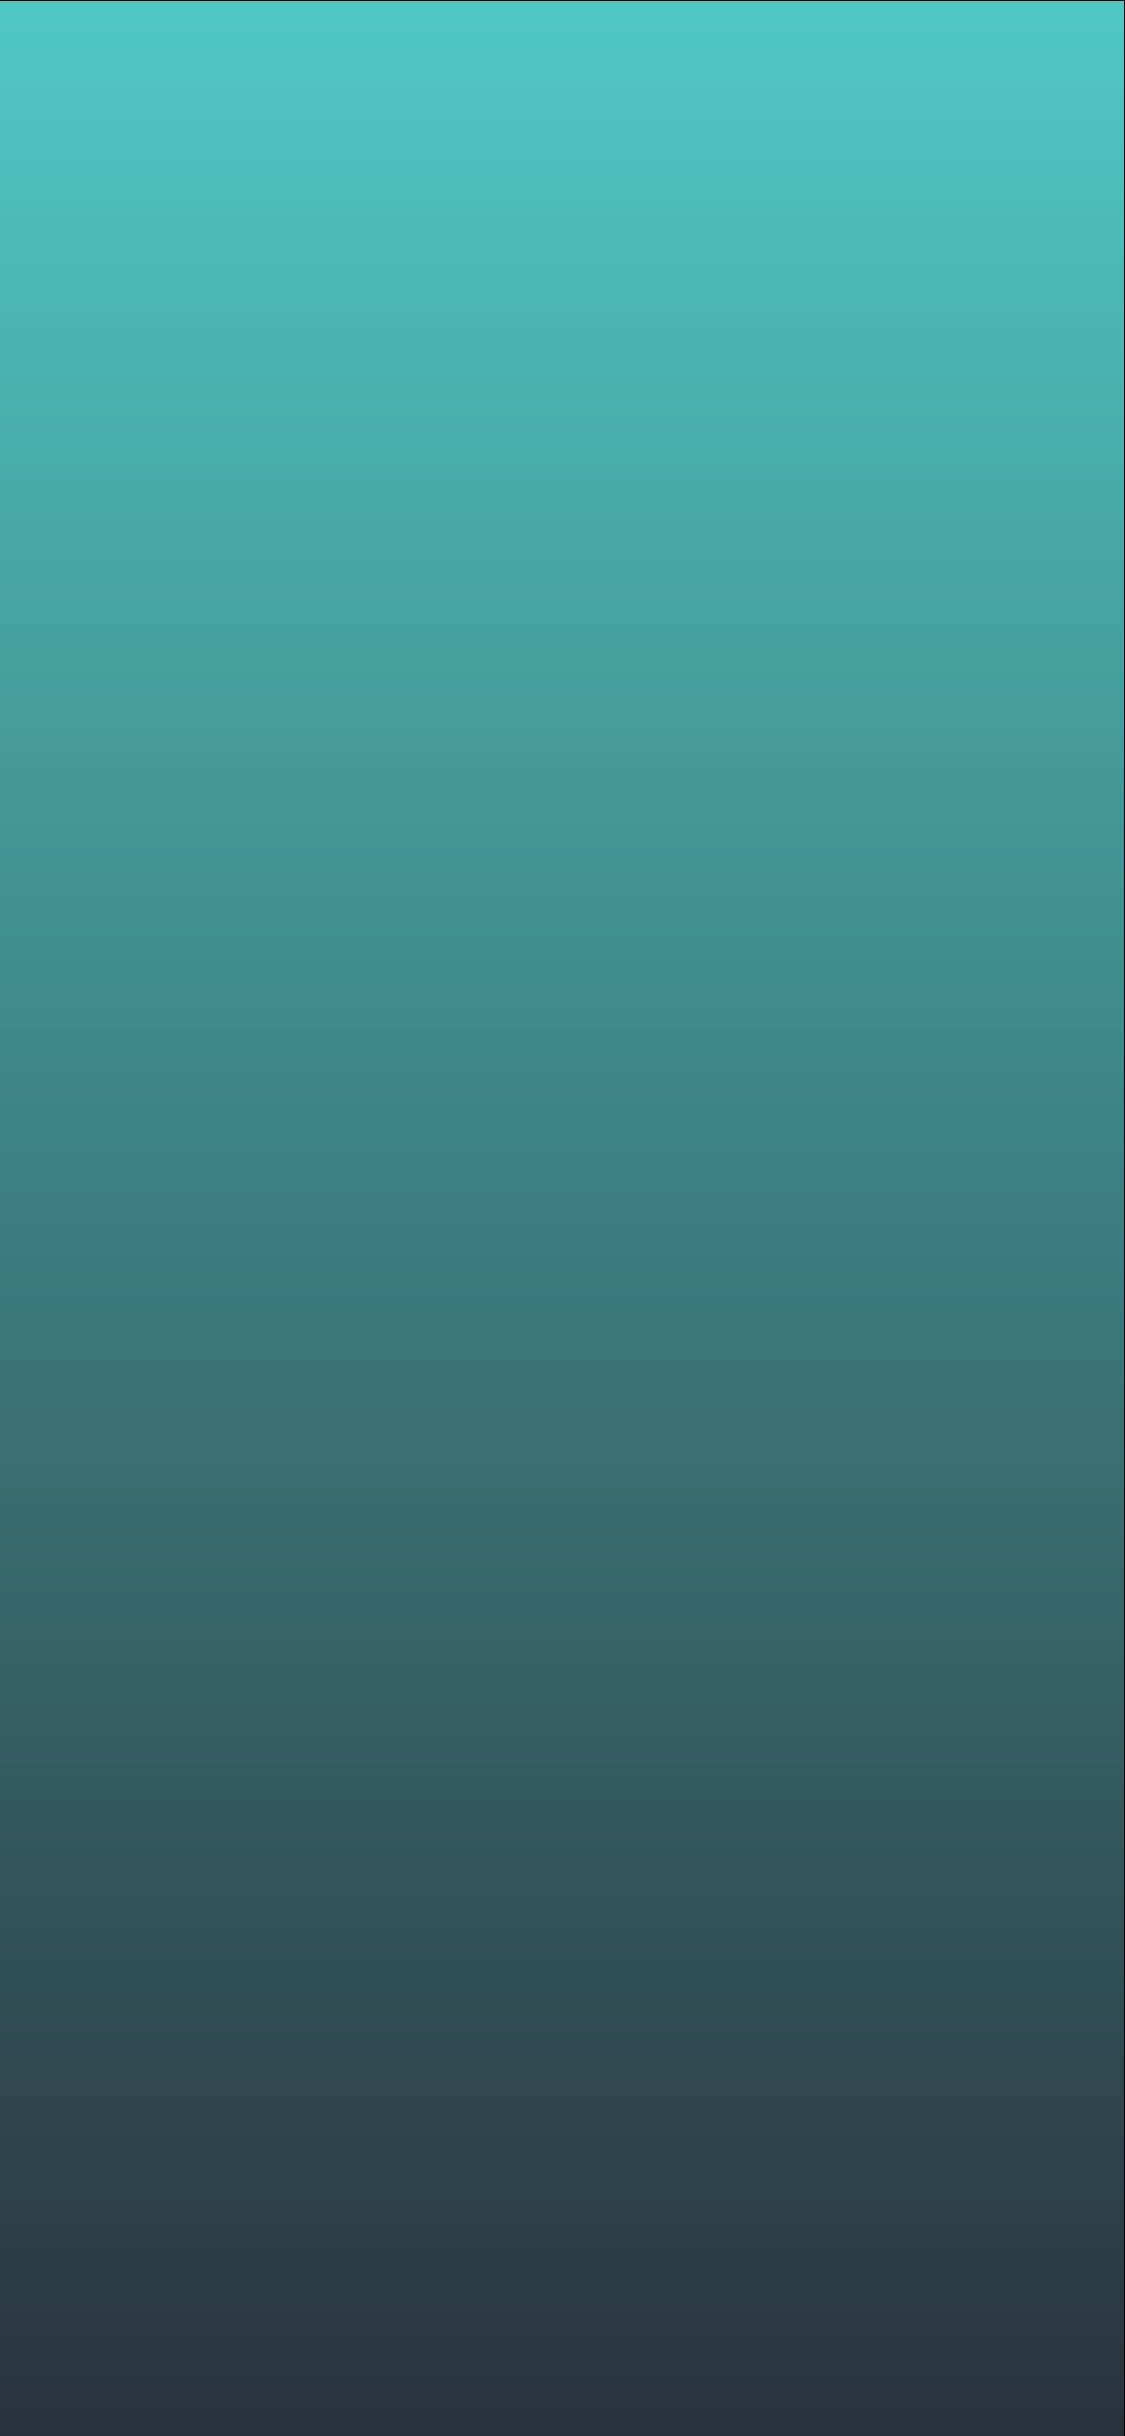 Free Teal Wallpaper Downloads, [300+] Teal Wallpapers for FREE | Wallpapers .com